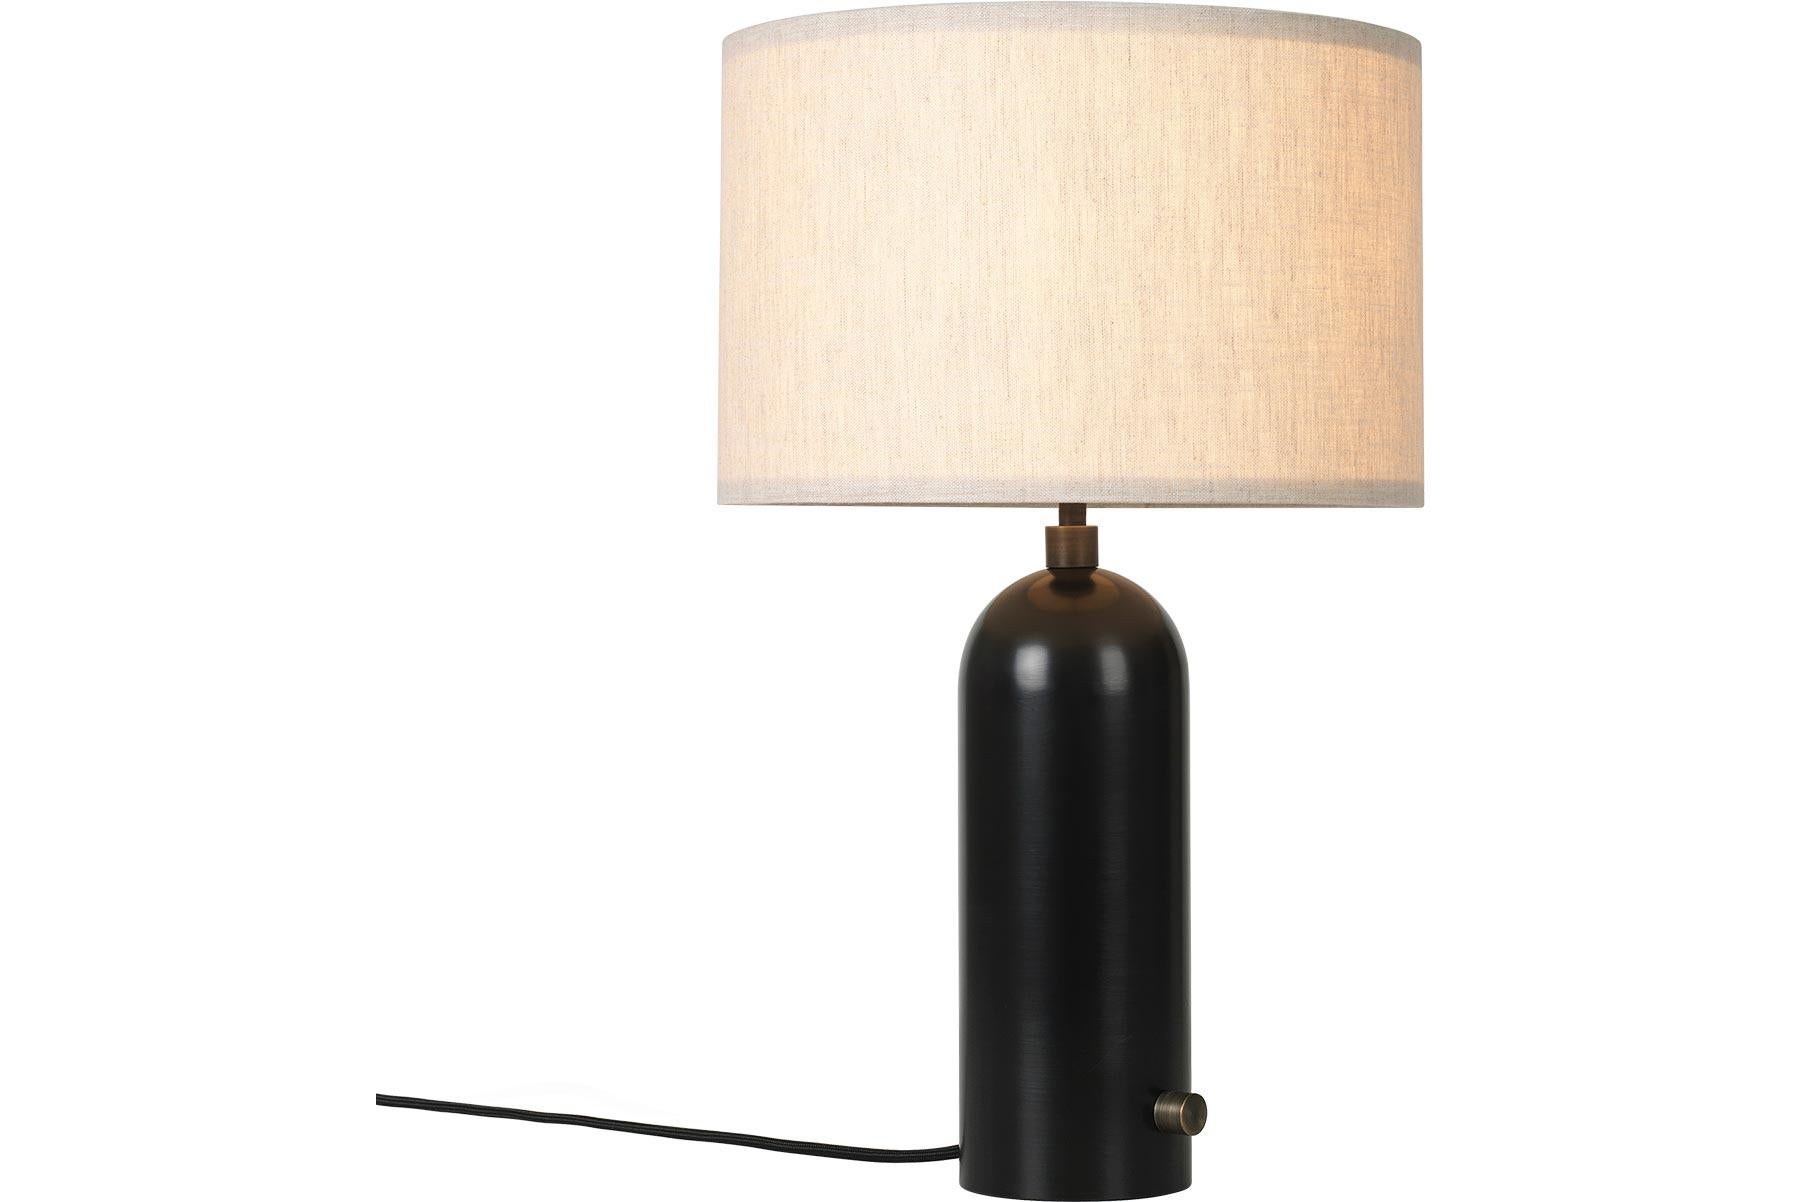 Powder-Coated Gravity Table Lamp - Small, Grey Marble, White. For Sale